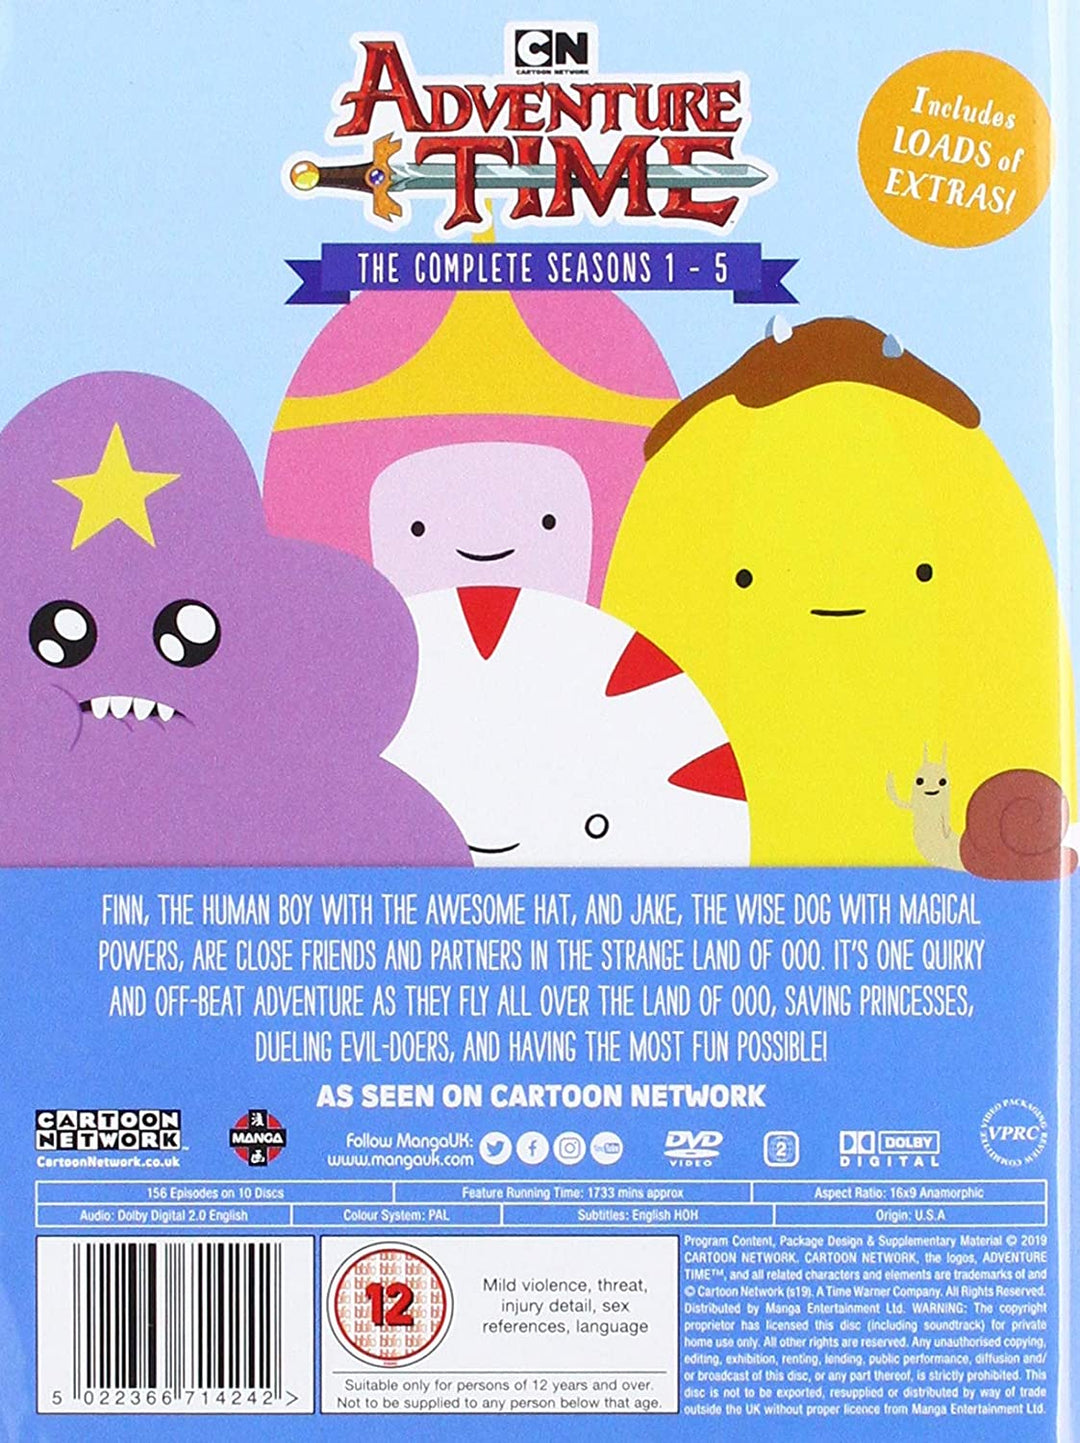 Adventure Time - Complete Seasons 1-5 Collection [DVD]